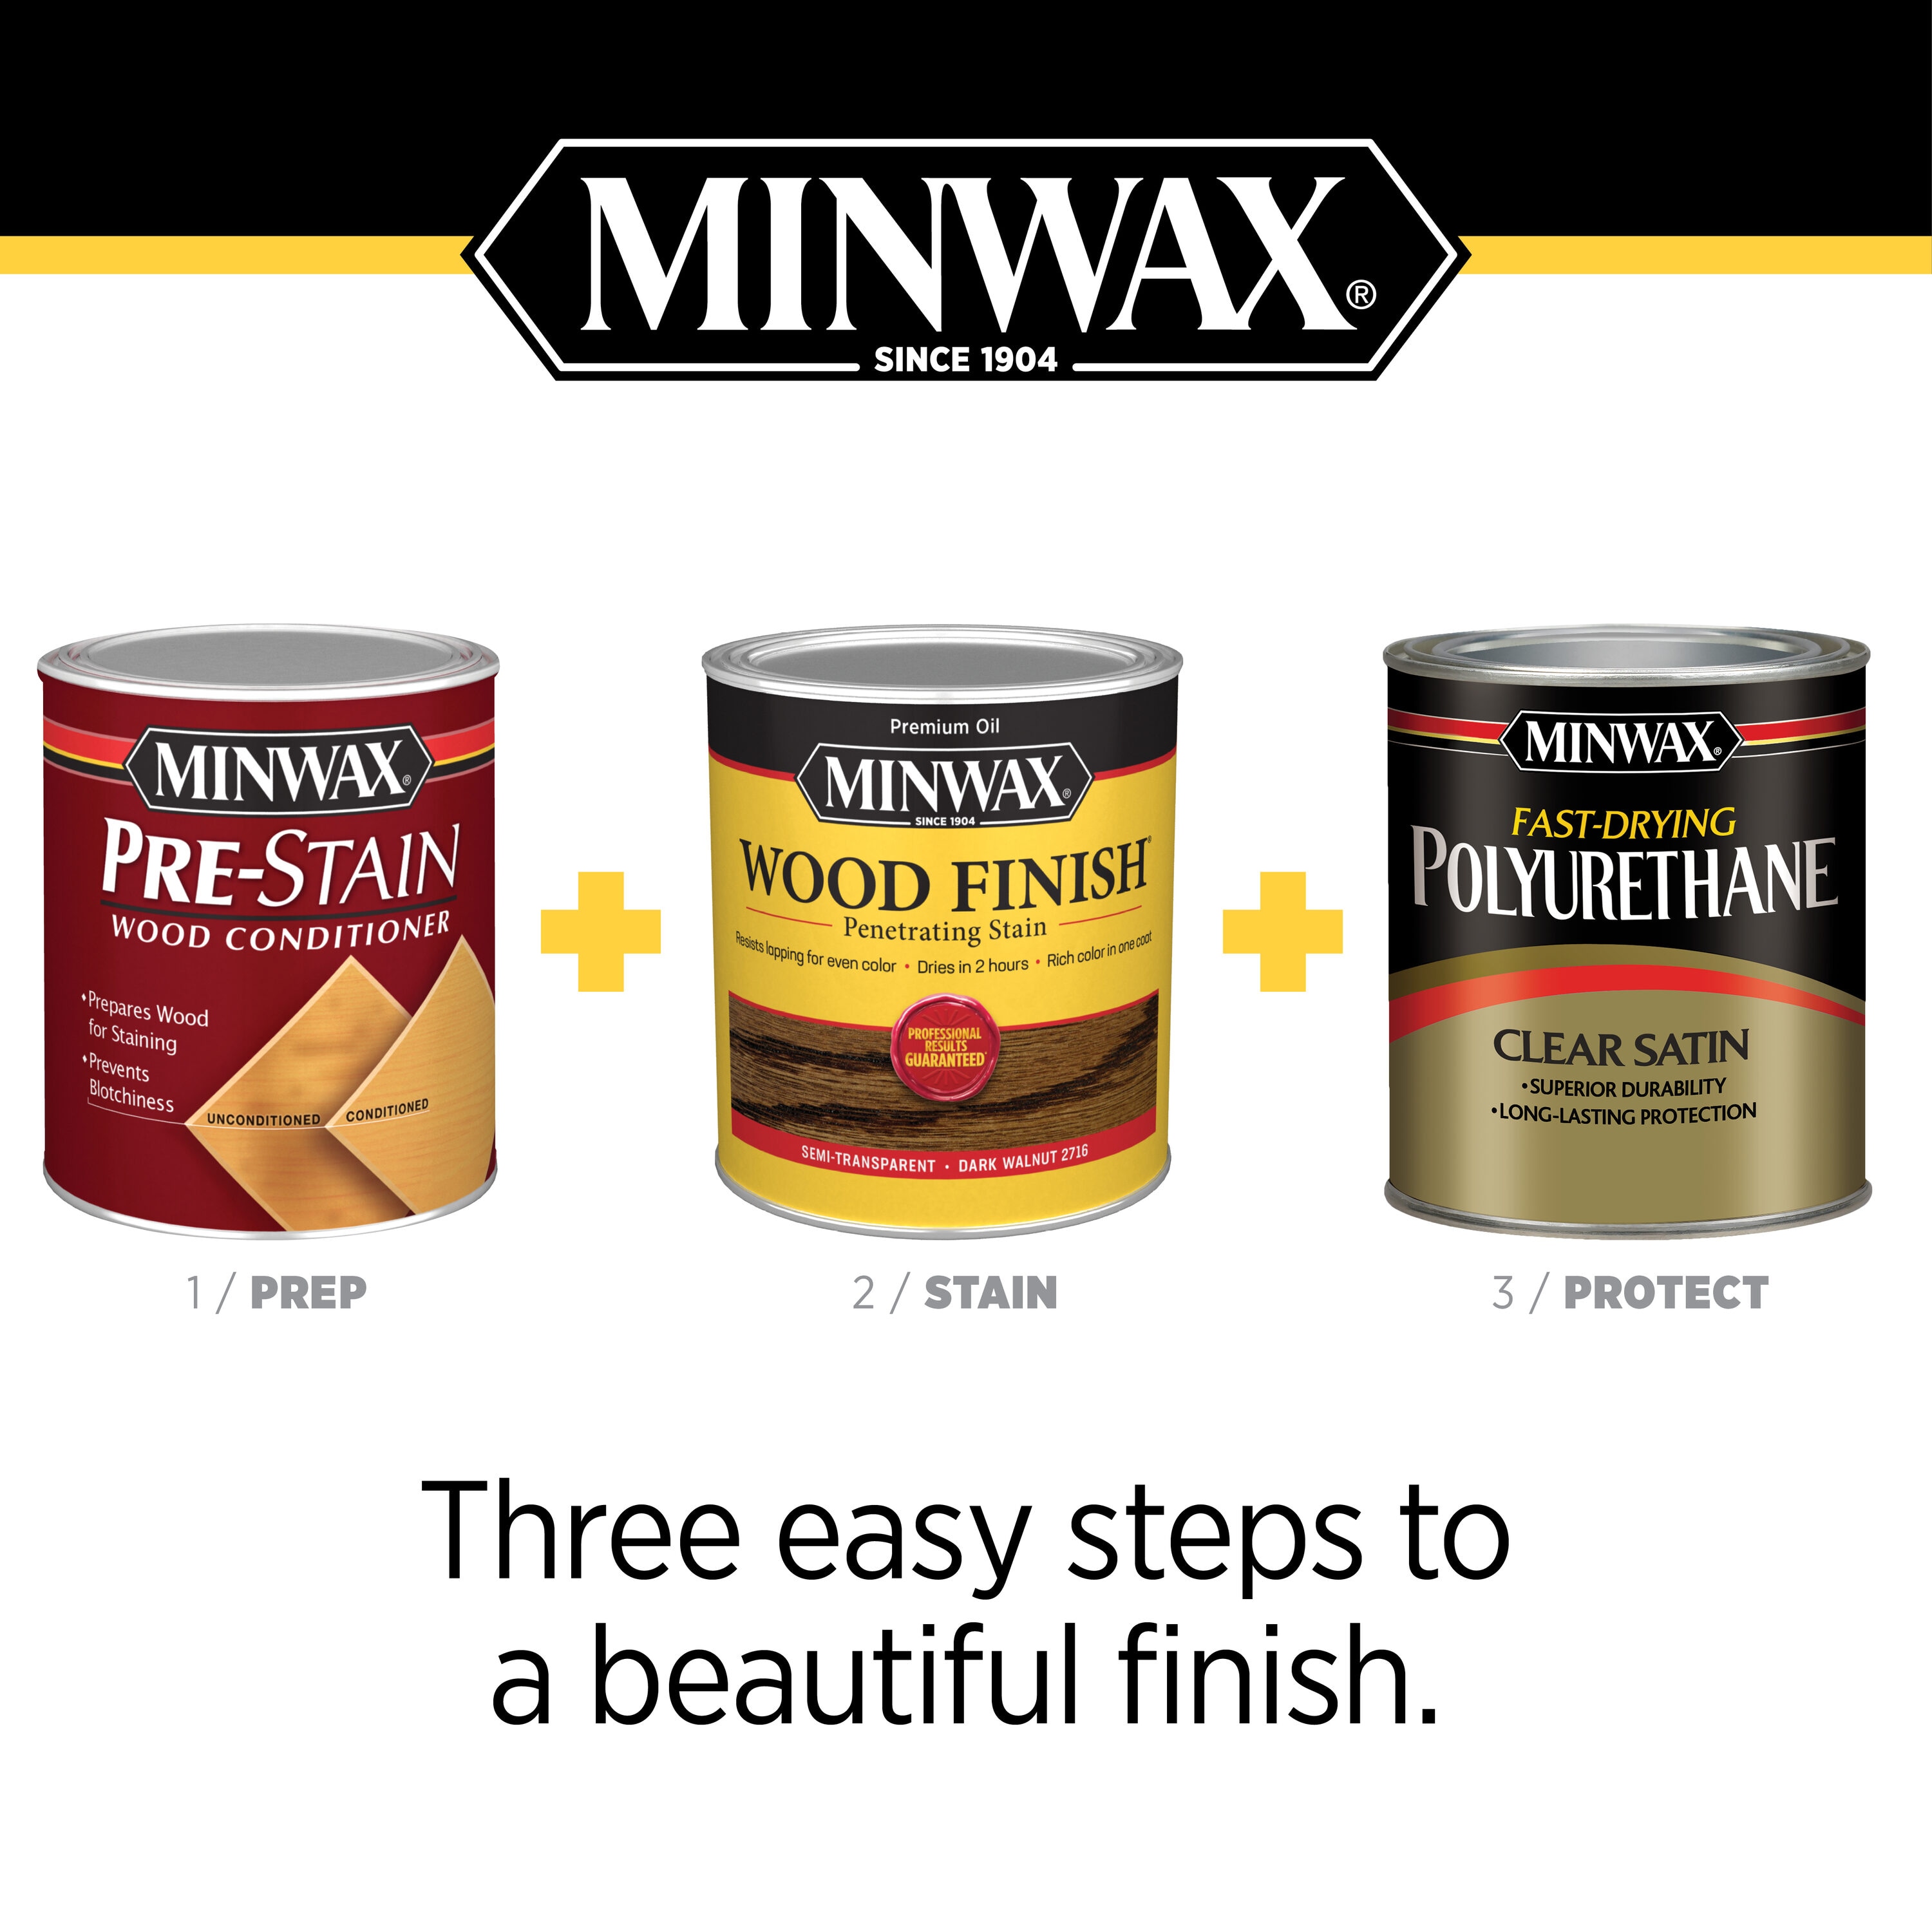 Minwax Wood Finish Water-Based Violet Mw1170 Semi-Transparent Interior Stain  (1-Quart) in the Interior Stains department at